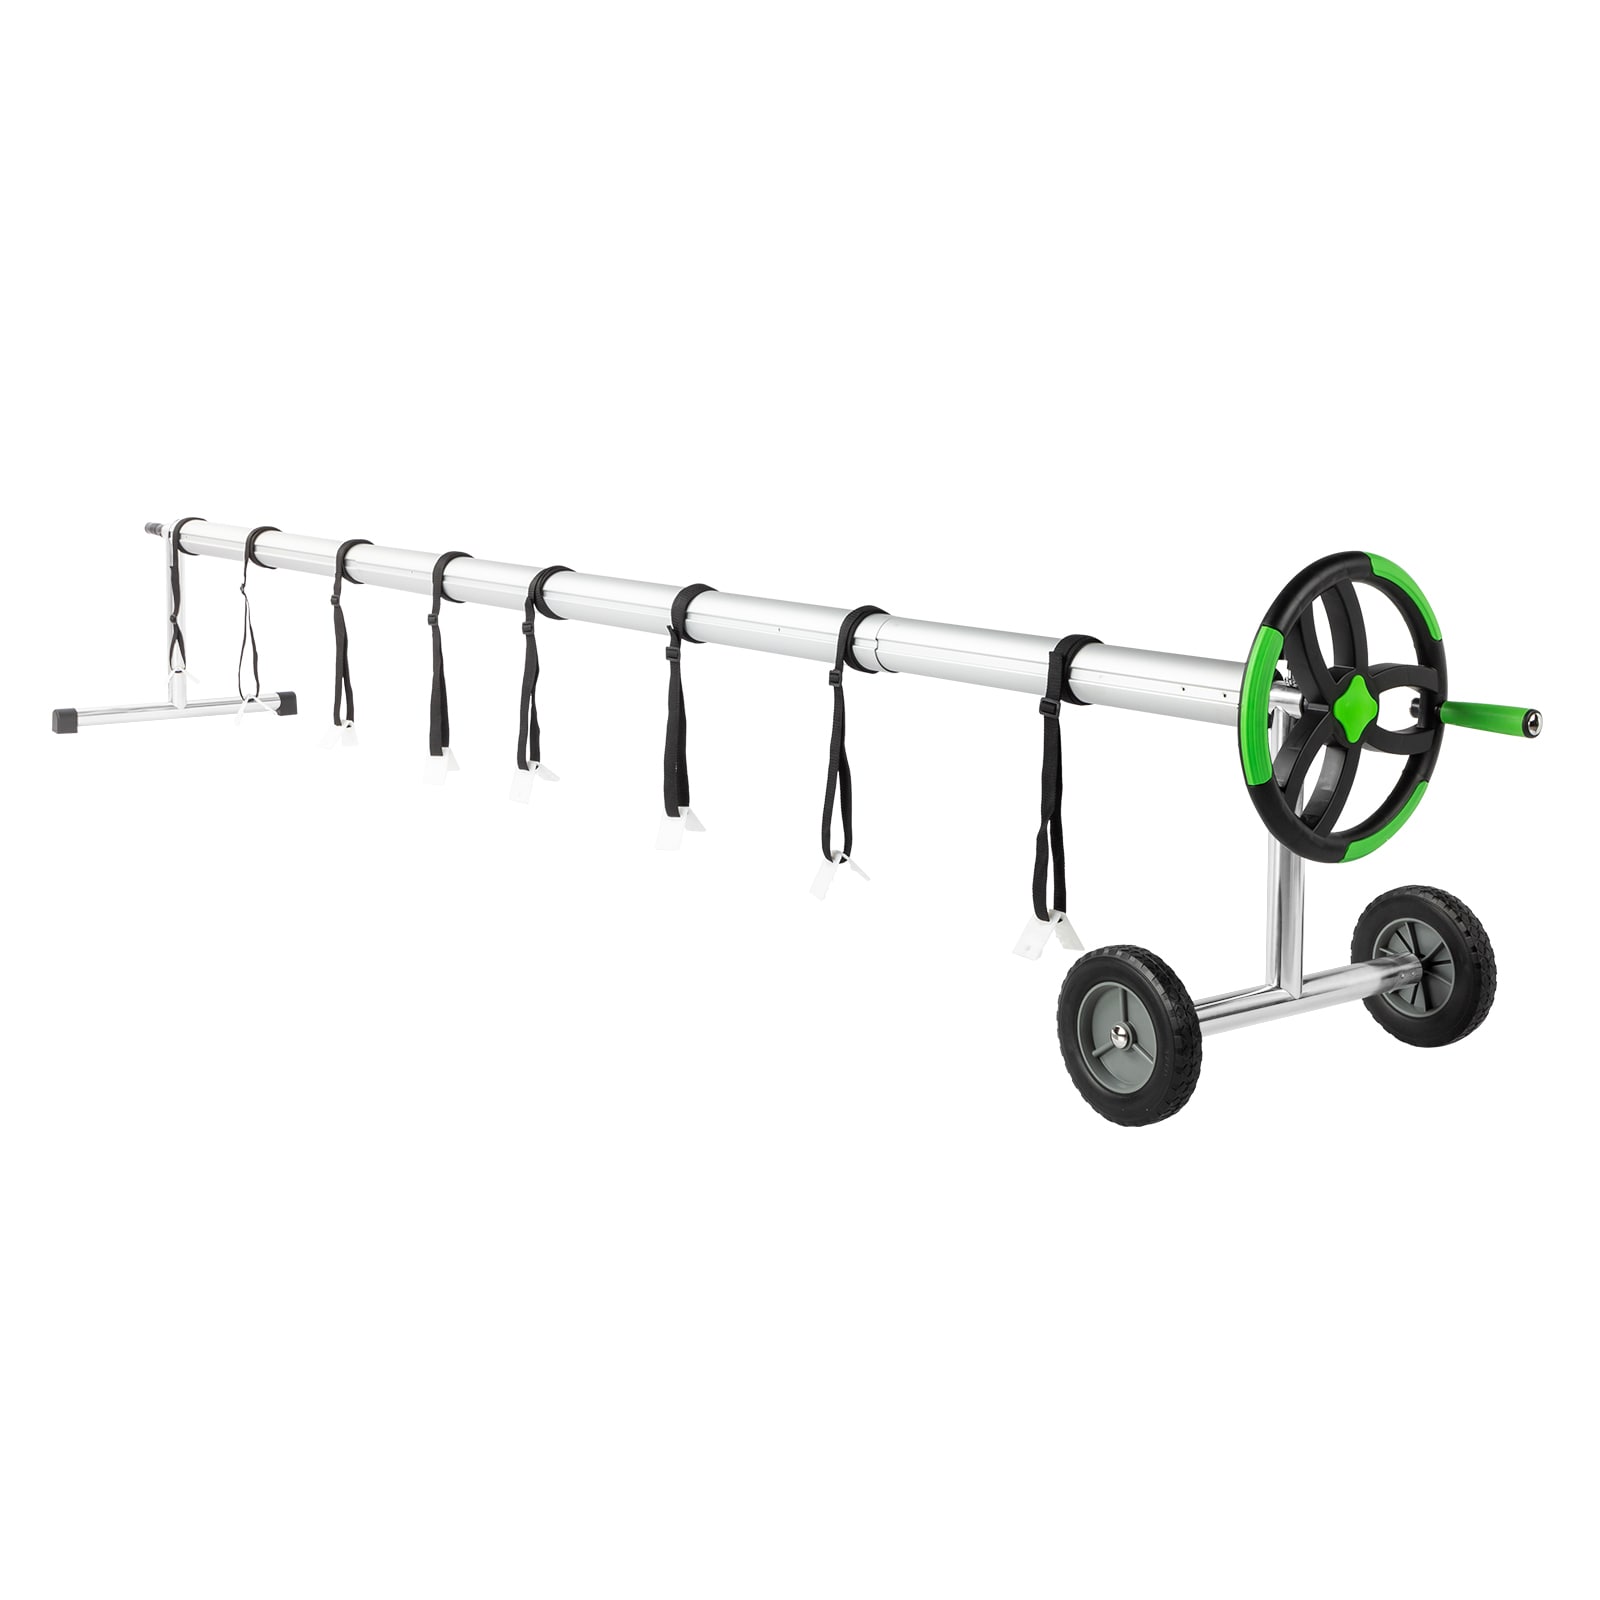 The Storm Commercial Inground Solar Reel - Up to 24' Wide 